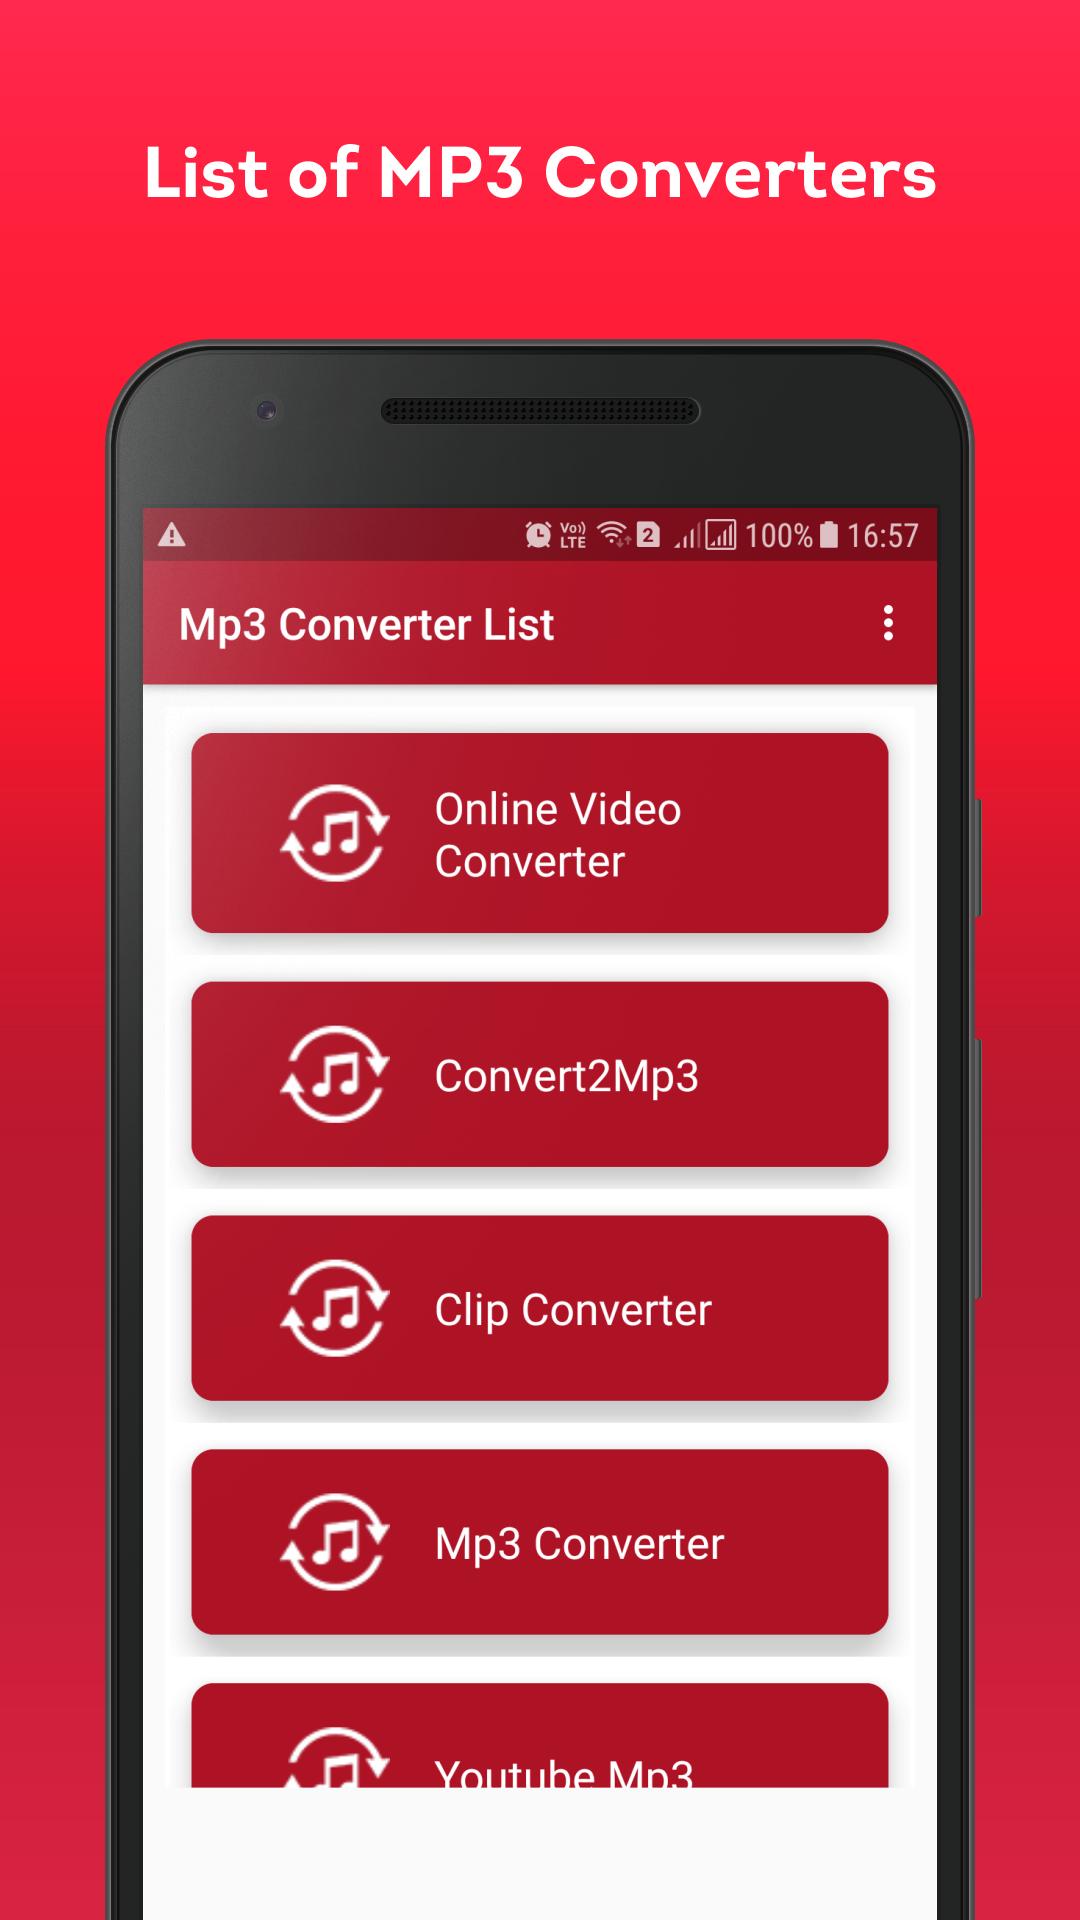 Video To Mp3 Converter : List of MP3 Converters for Android - APK Download